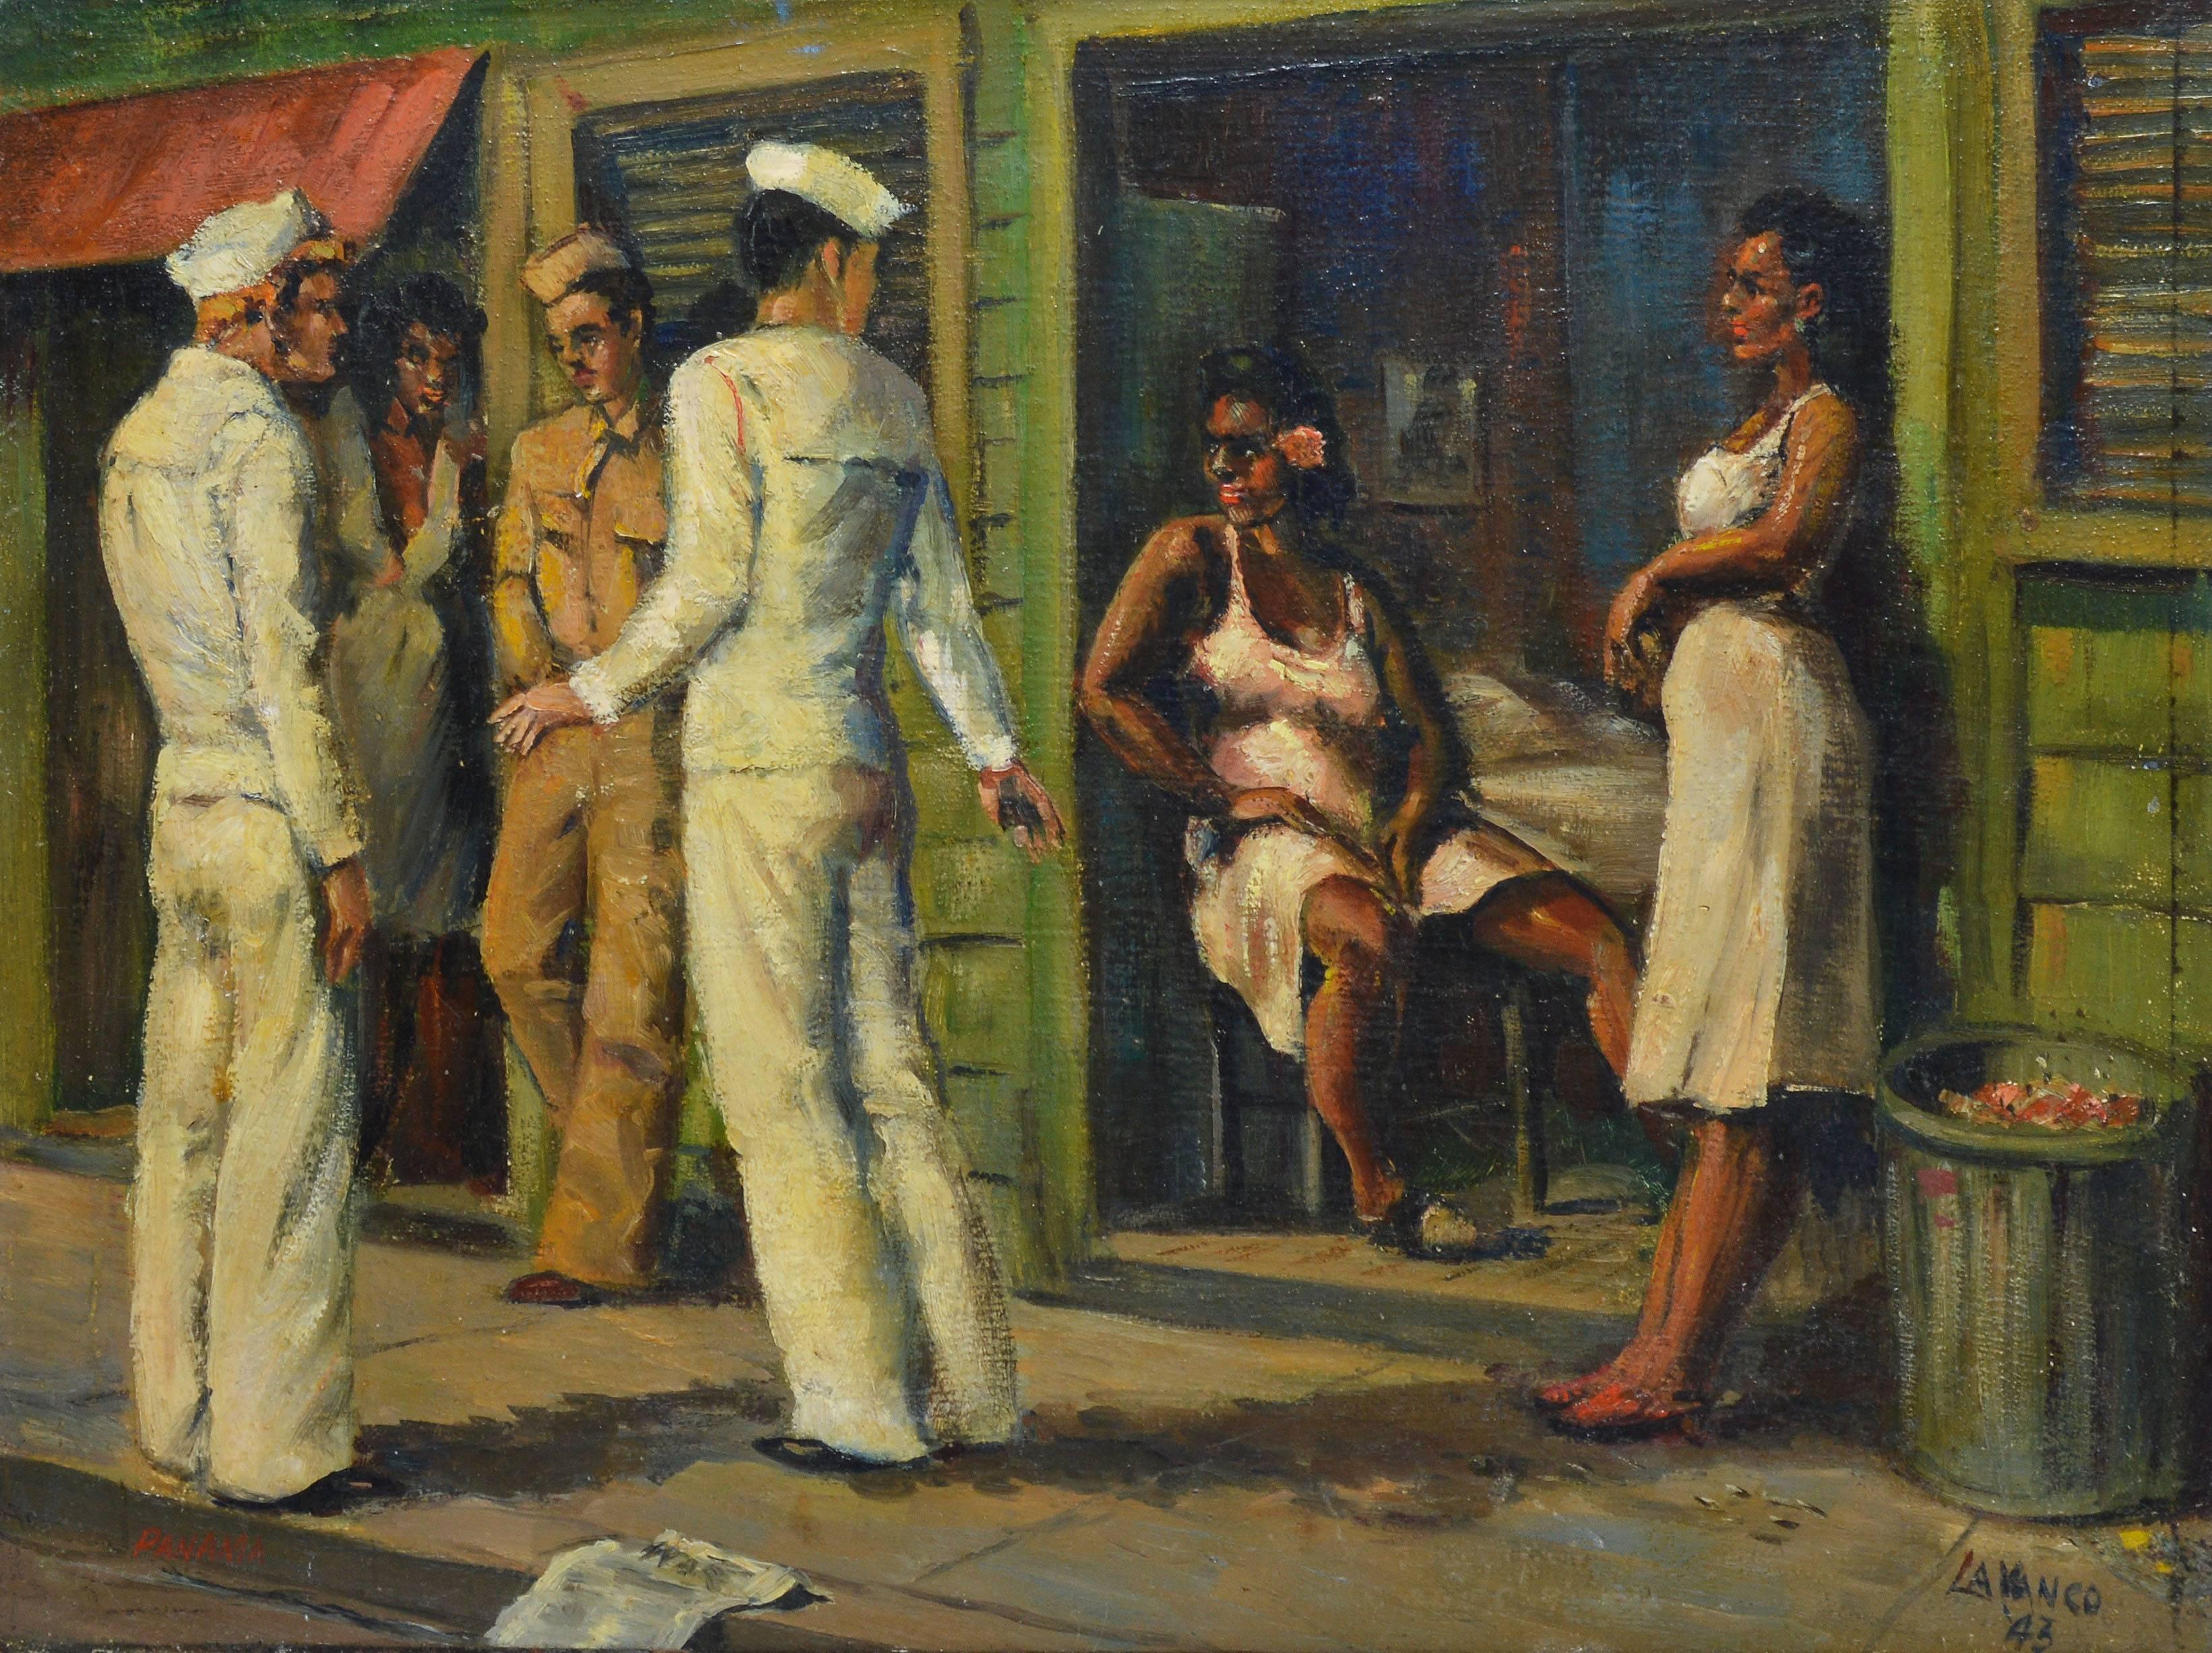 Sailors in Port, Panama 1942 - Modern Painting by Unknown